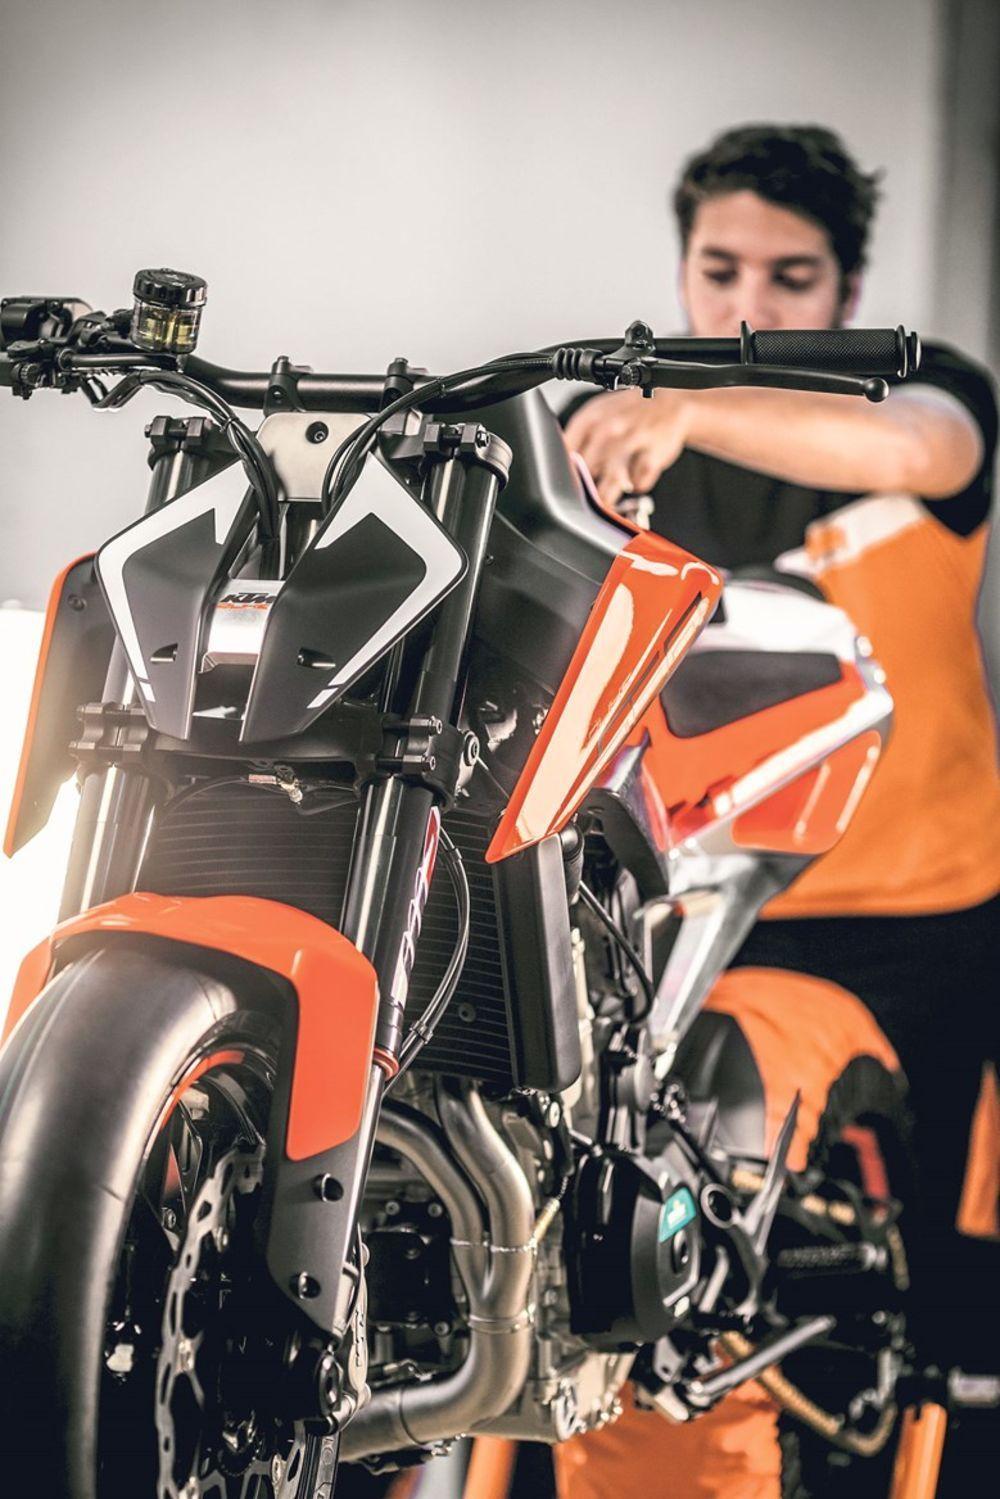 The KTM 790 Duke Prototype Is Here To Own The Middleweight Naked